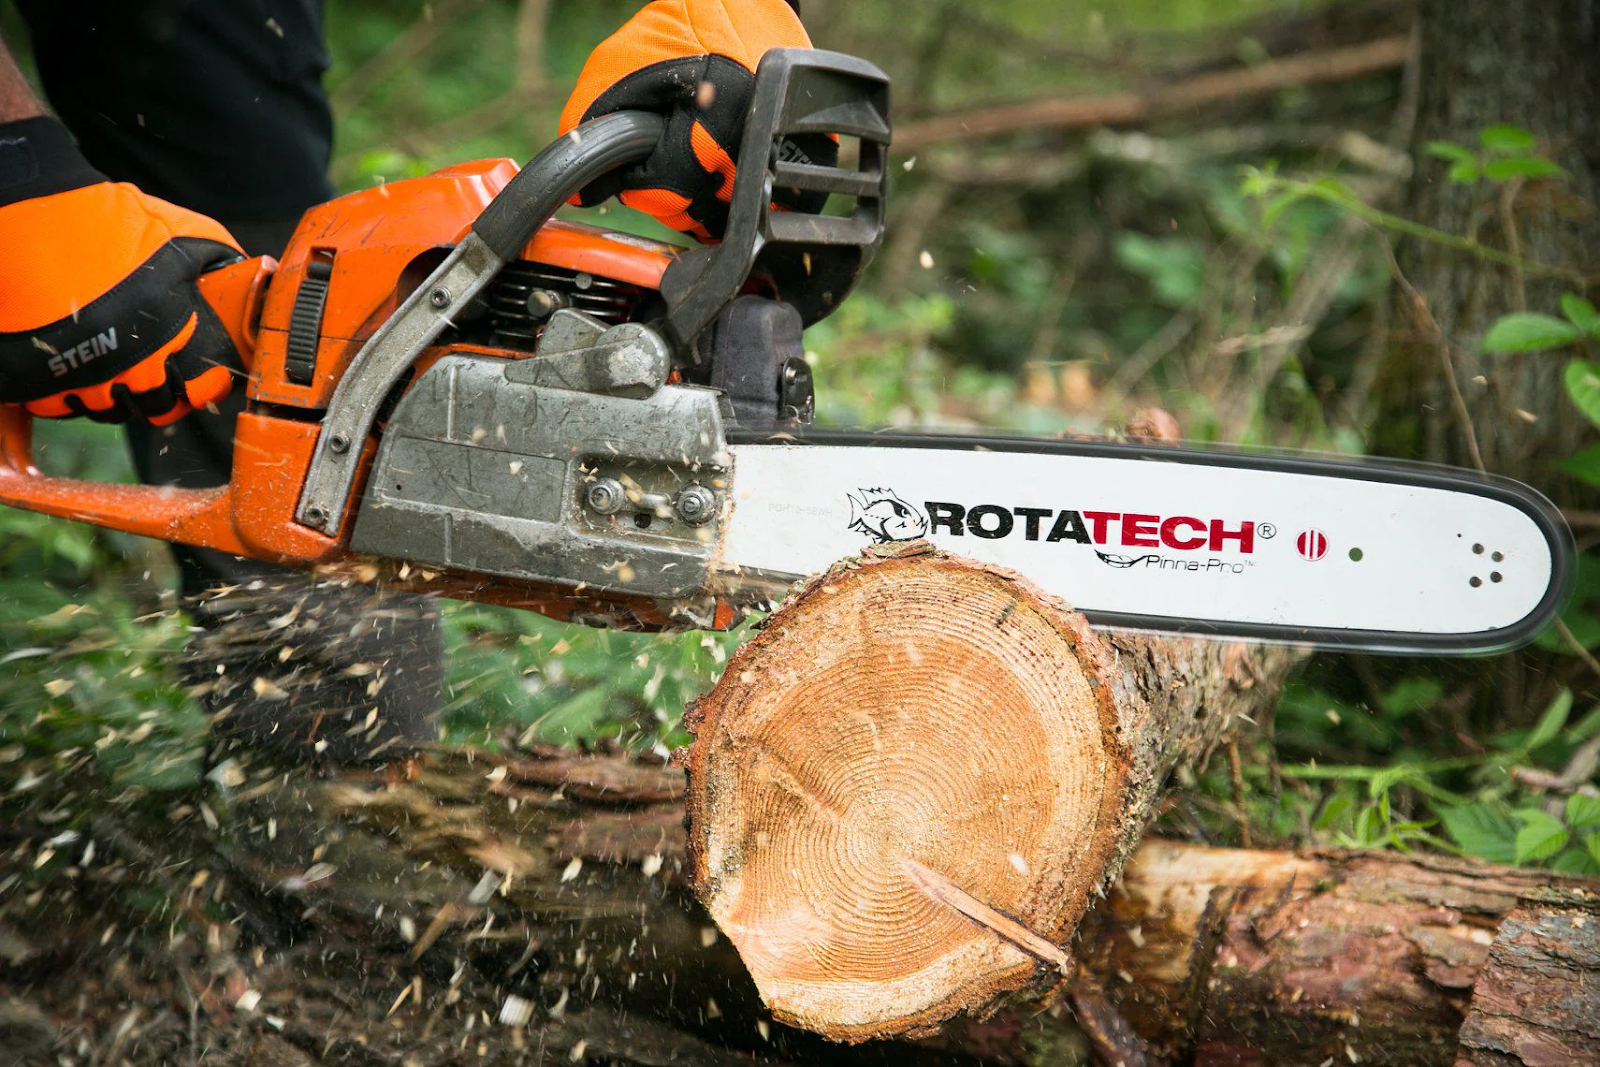 How to clean a chainsaw?